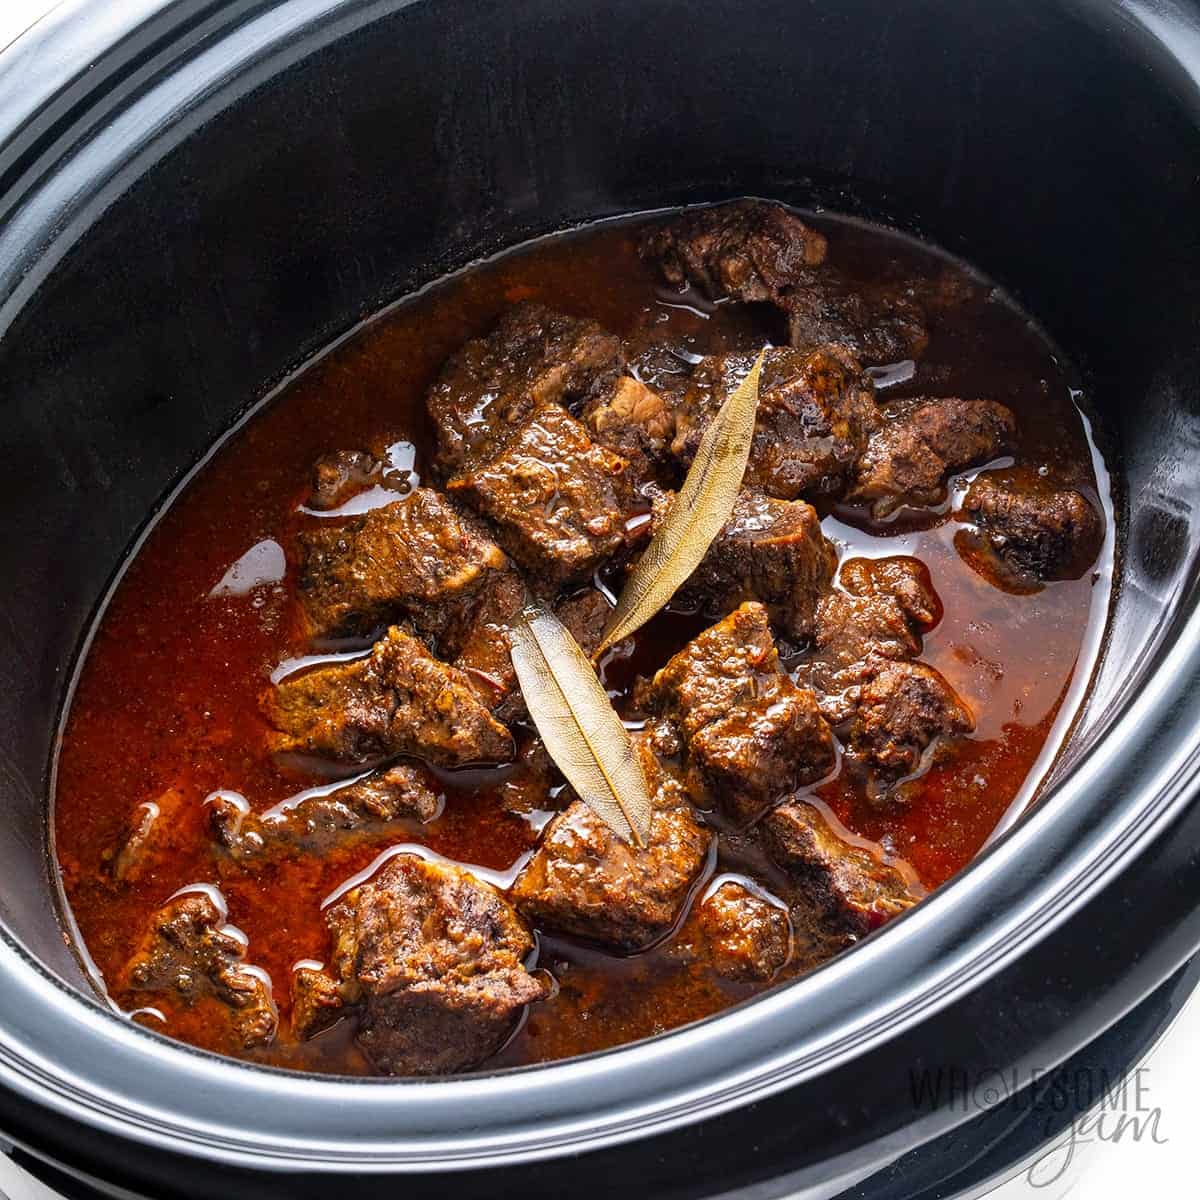 Cooked beef and sauce in slow cooker, before shredding.